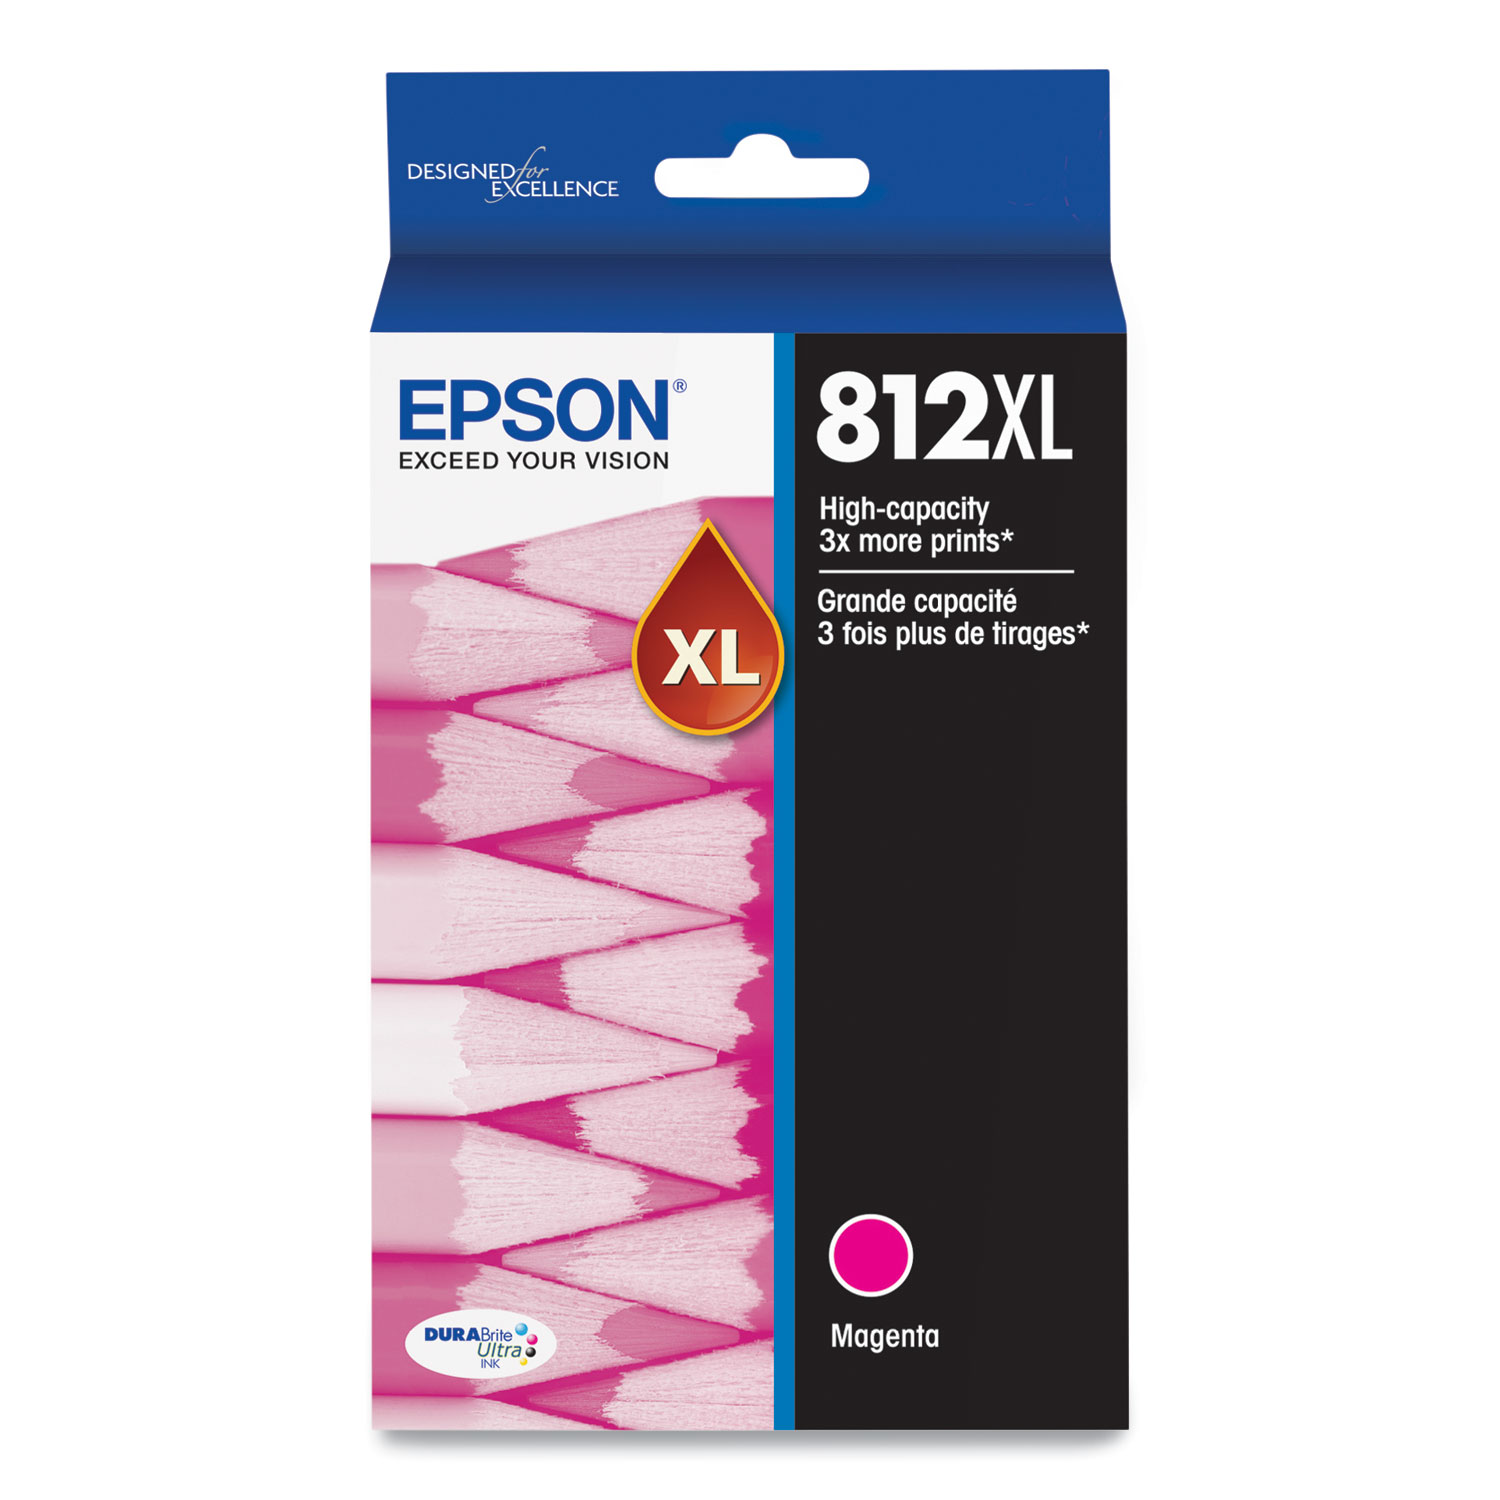 Epson® T812XL320S (T812XL) DURABrite Ultra High-Yield Ink, 1,100 Page-Yield, Magenta